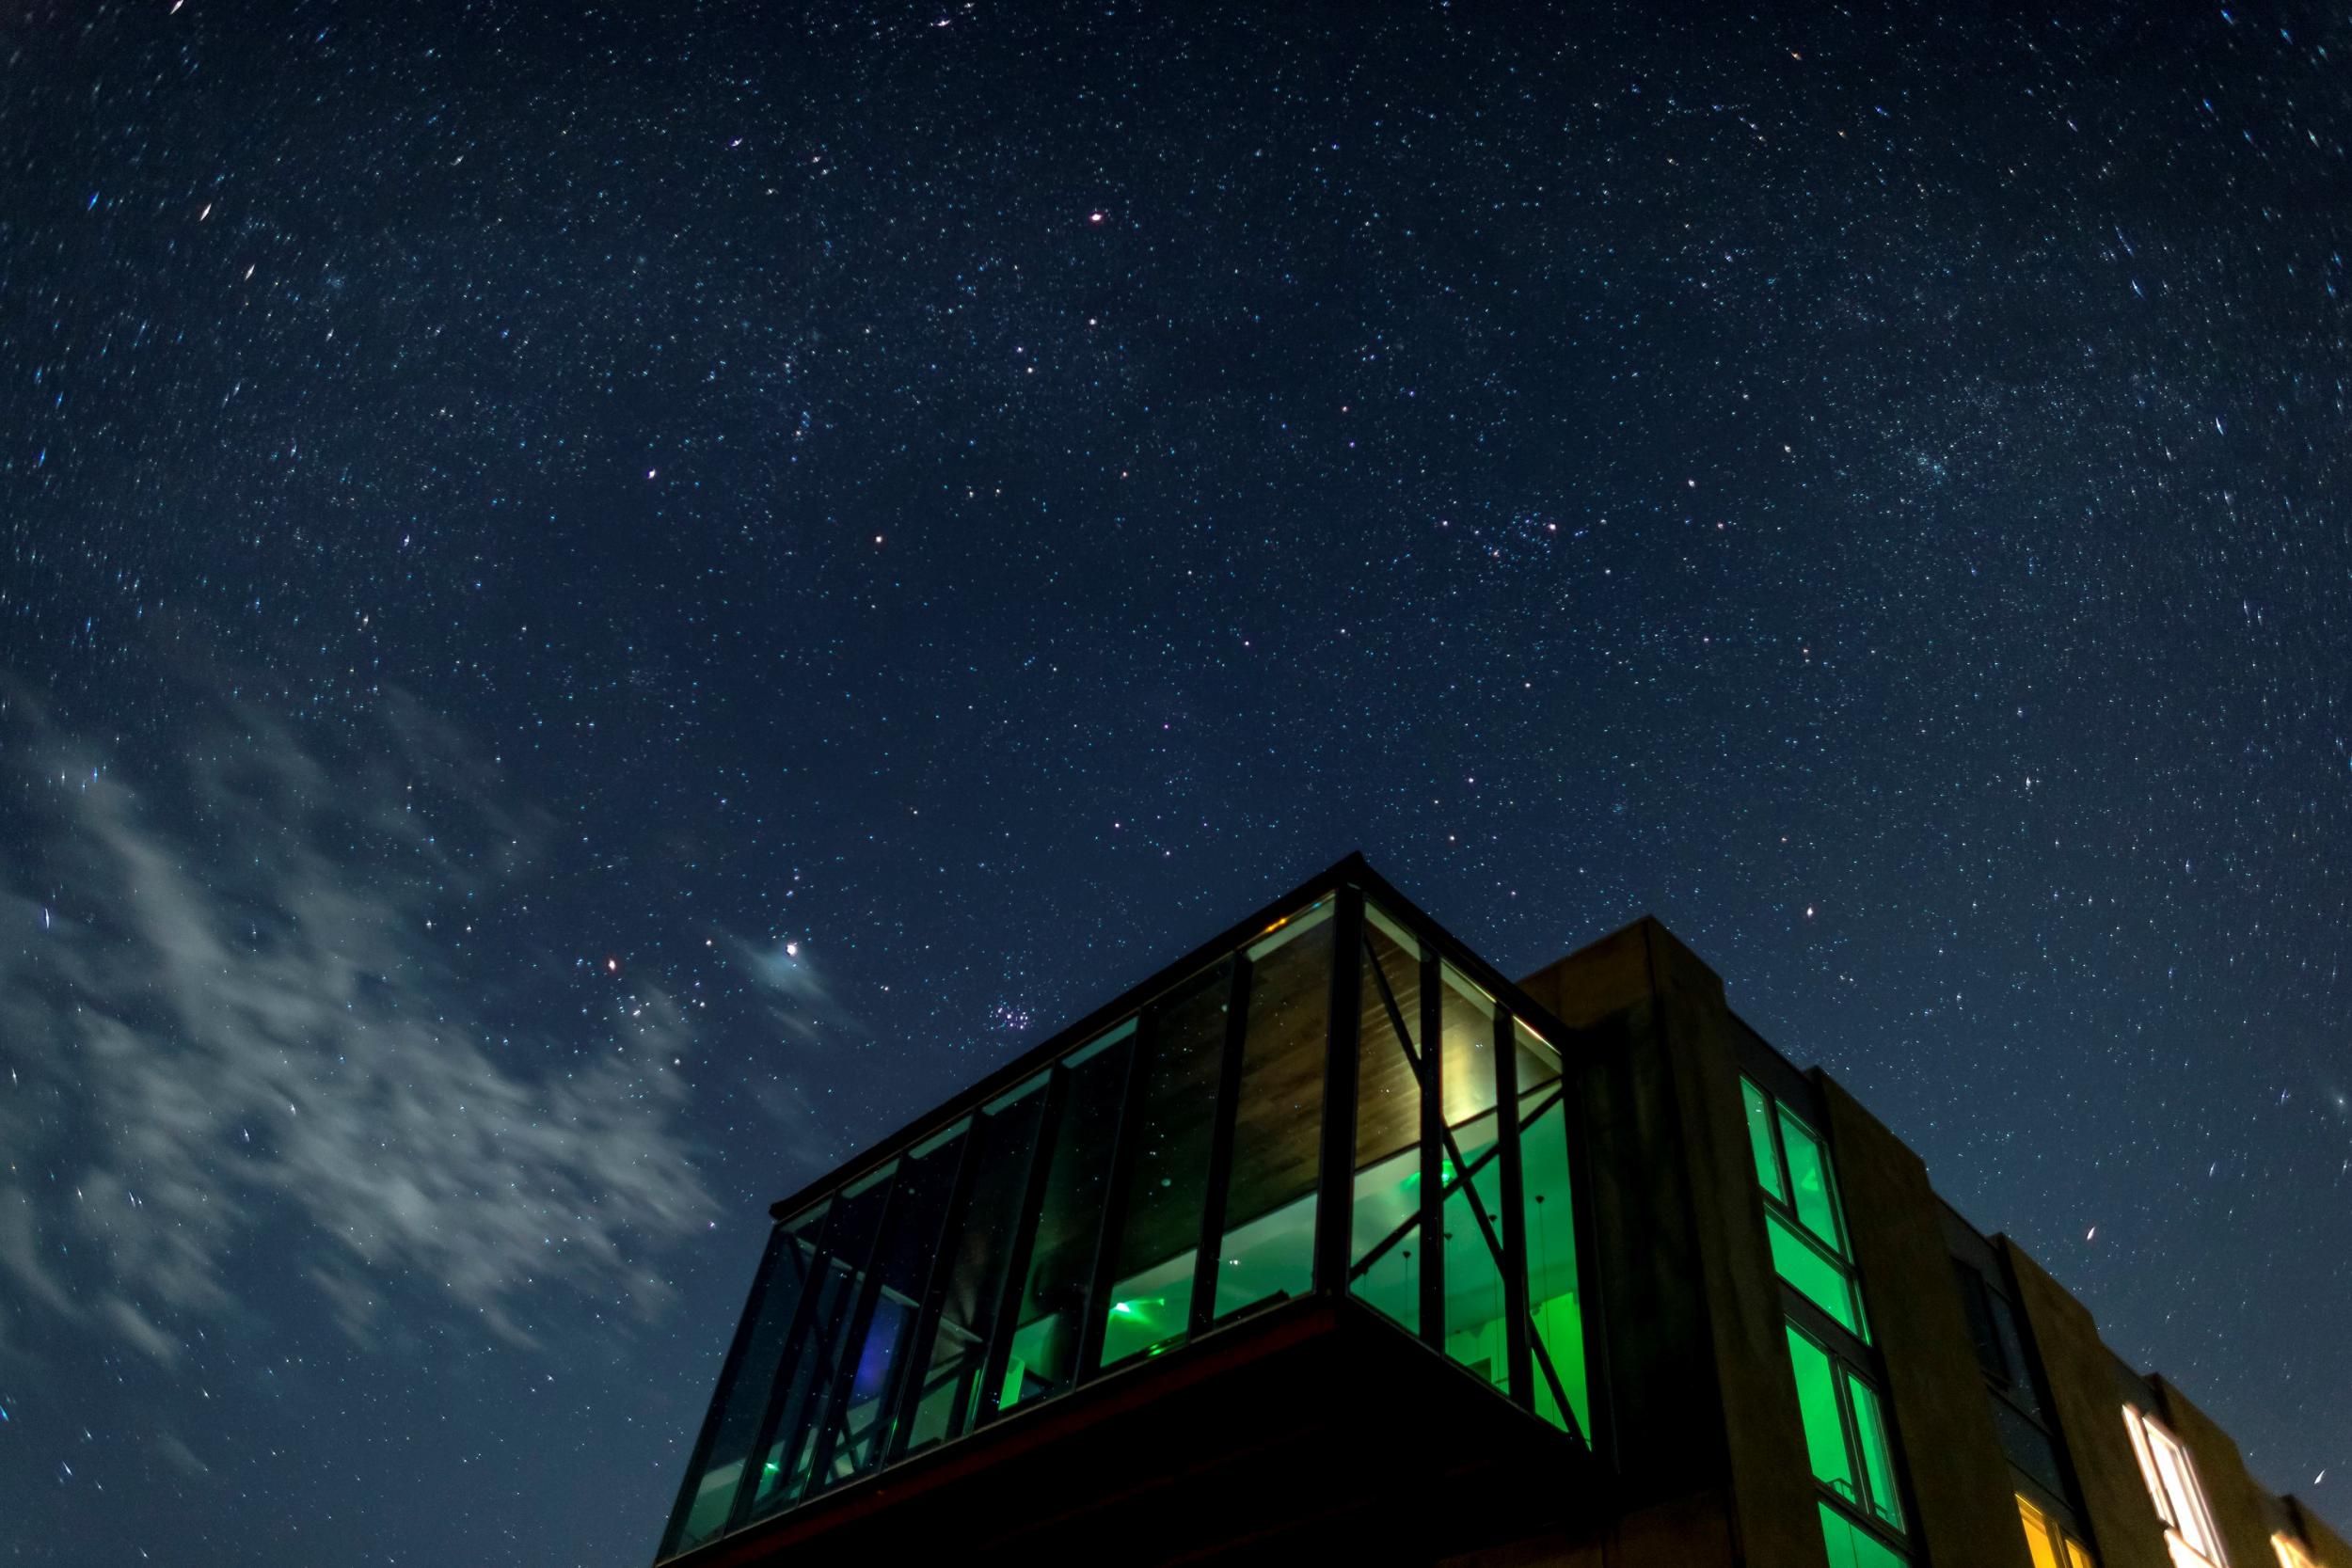 Hotel Ion, where blockbuster views of the sky come for free